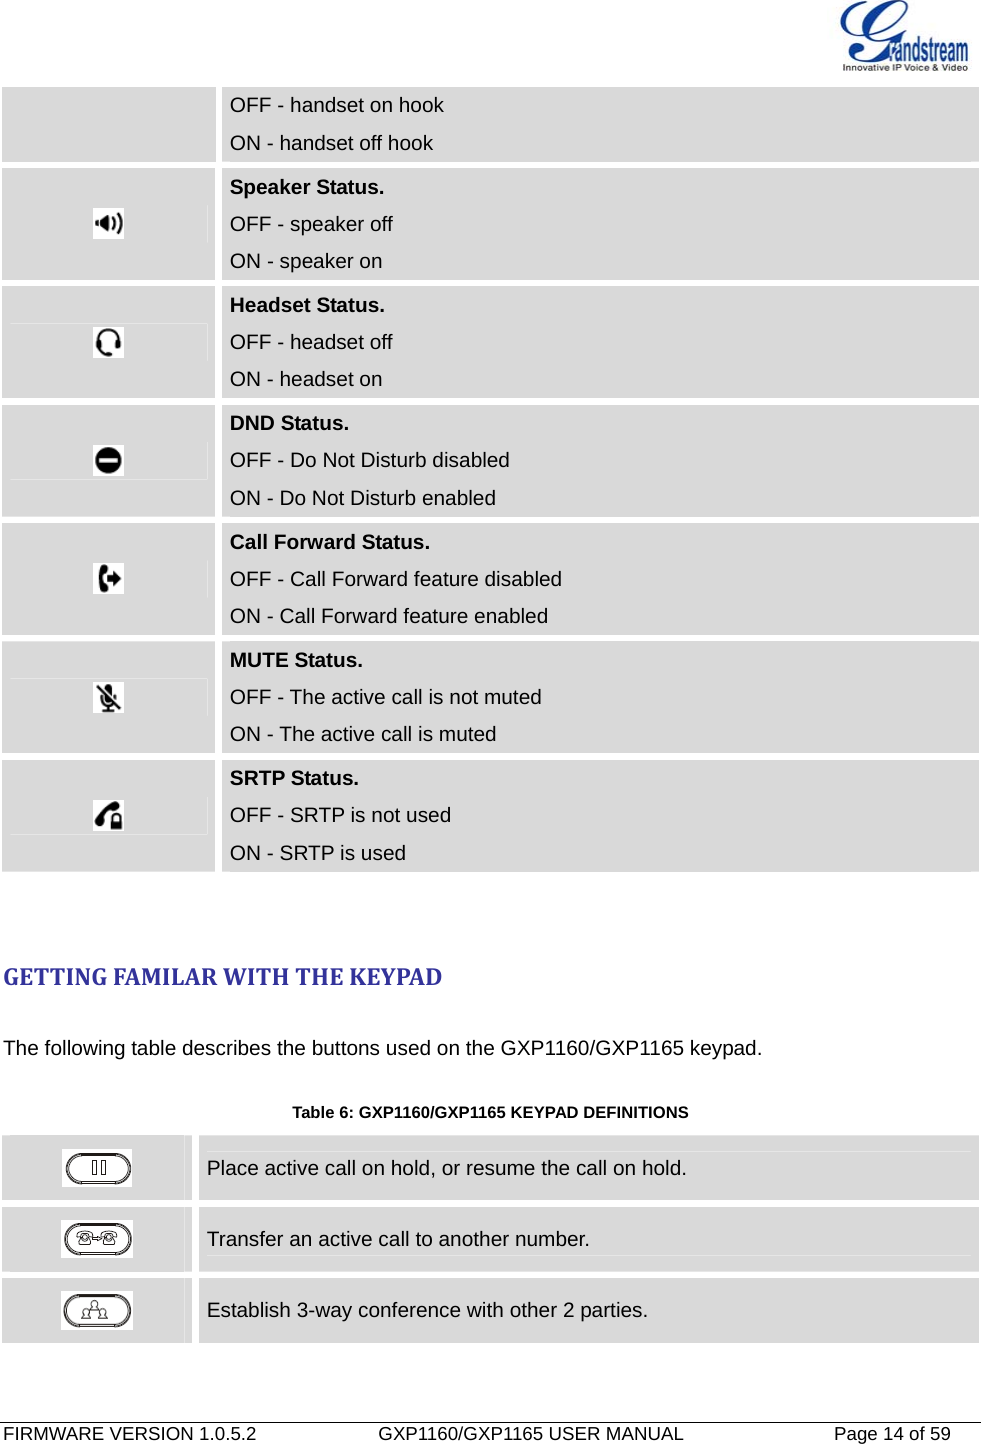   FIRMWARE VERSION 1.0.5.2             GXP1160/GXP1165 USER MANUAL           Page 14 of 59                                   OFF - handset on hook                                 ON - handset off hook  Speaker Status. OFF - speaker off                                ON - speaker on  Headset Status. OFF - headset off ON - headset on  DND Status. OFF - Do Not Disturb disabled ON - Do Not Disturb enabled  Call Forward Status. OFF - Call Forward feature disabled ON - Call Forward feature enabled  MUTE Status. OFF - The active call is not muted ON - The active call is muted  SRTP Status. OFF - SRTP is not used ON - SRTP is used GETTINGFAMILARWITHTHEKEYPAD The following table describes the buttons used on the GXP1160/GXP1165 keypad.  Table 6: GXP1160/GXP1165 KEYPAD DEFINITIONS  Place active call on hold, or resume the call on hold.  Transfer an active call to another number.  Establish 3-way conference with other 2 parties. 